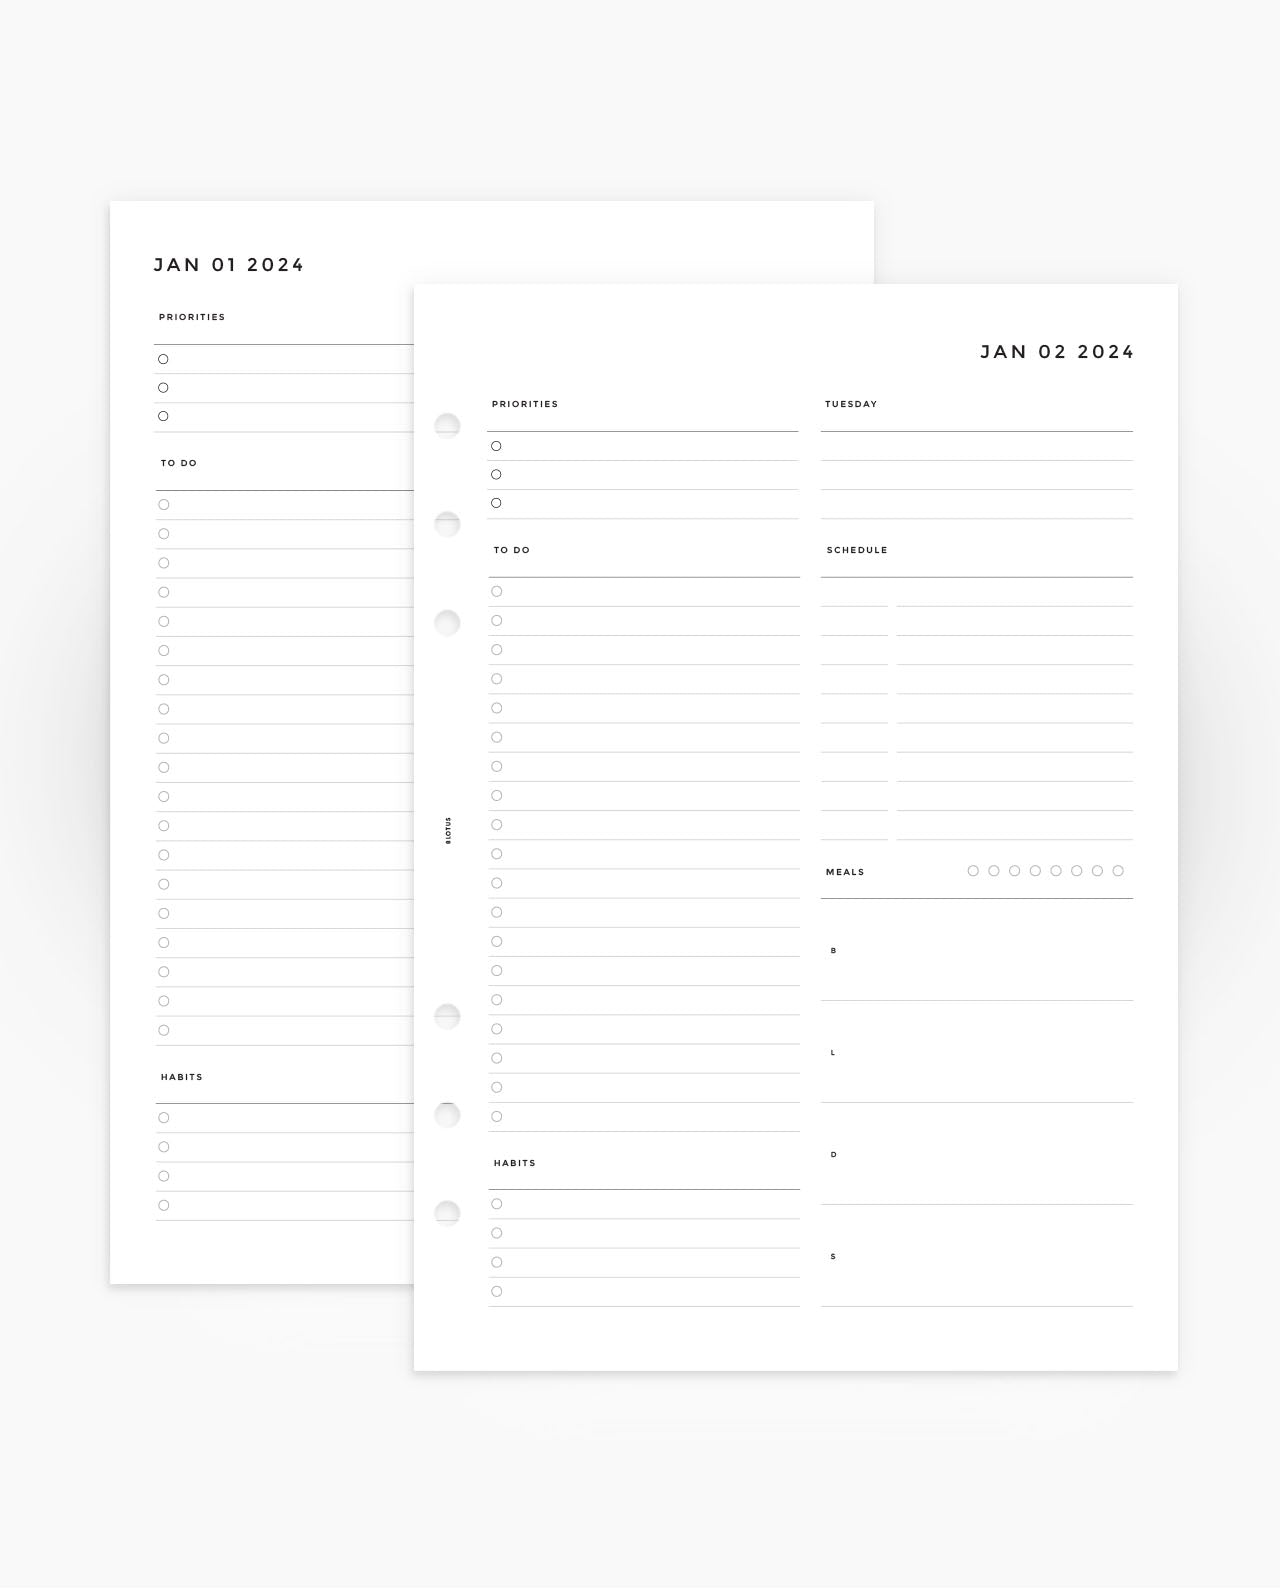 MN040 - 2024 Daily Meals & Habits Planner Inserts - DO1P (PREORDER)